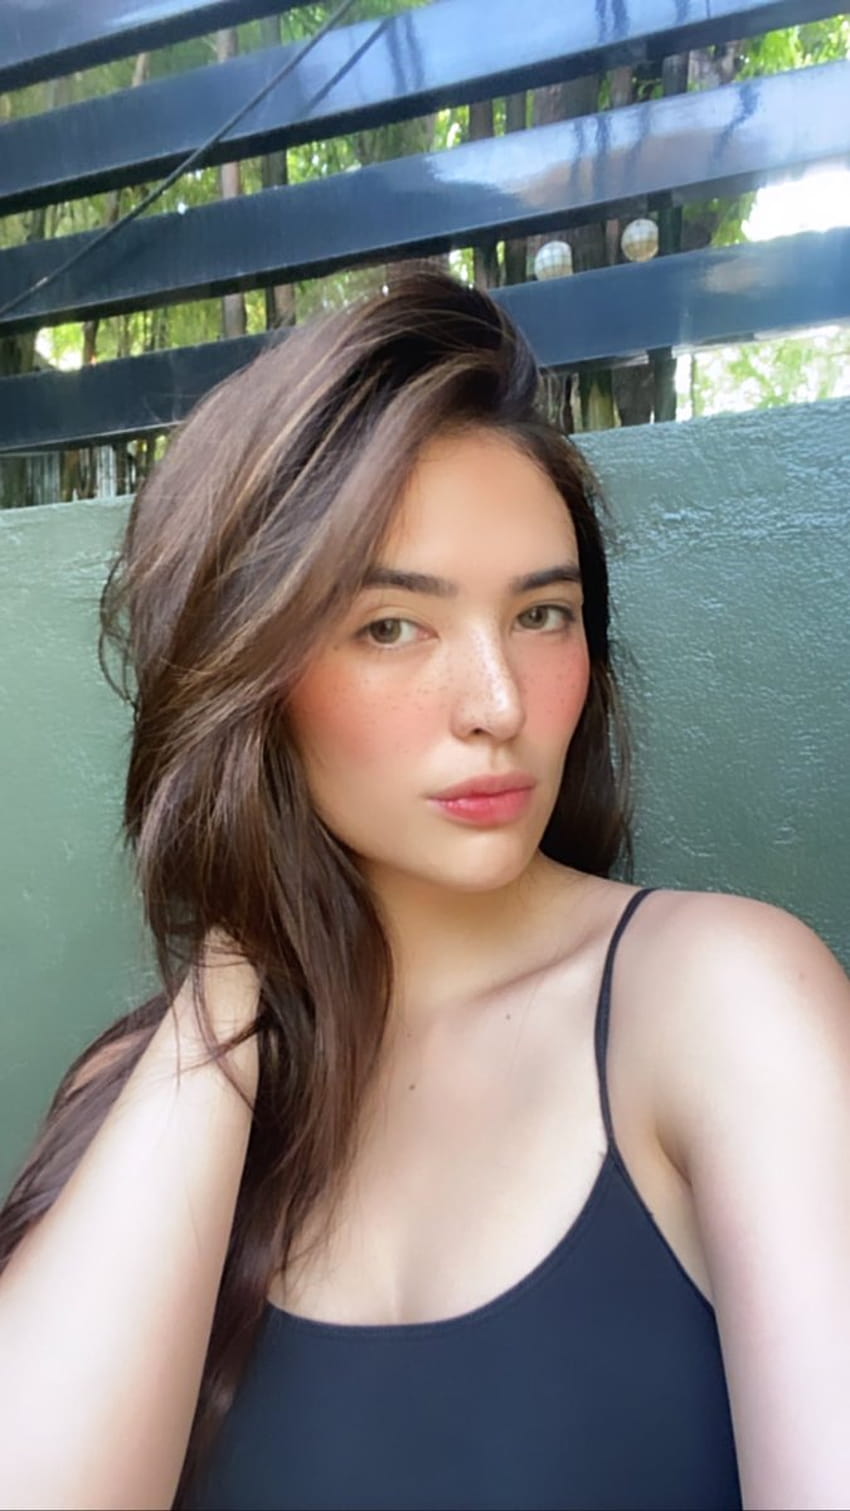 Sofia Andres on Twitter: HD phone wallpaper